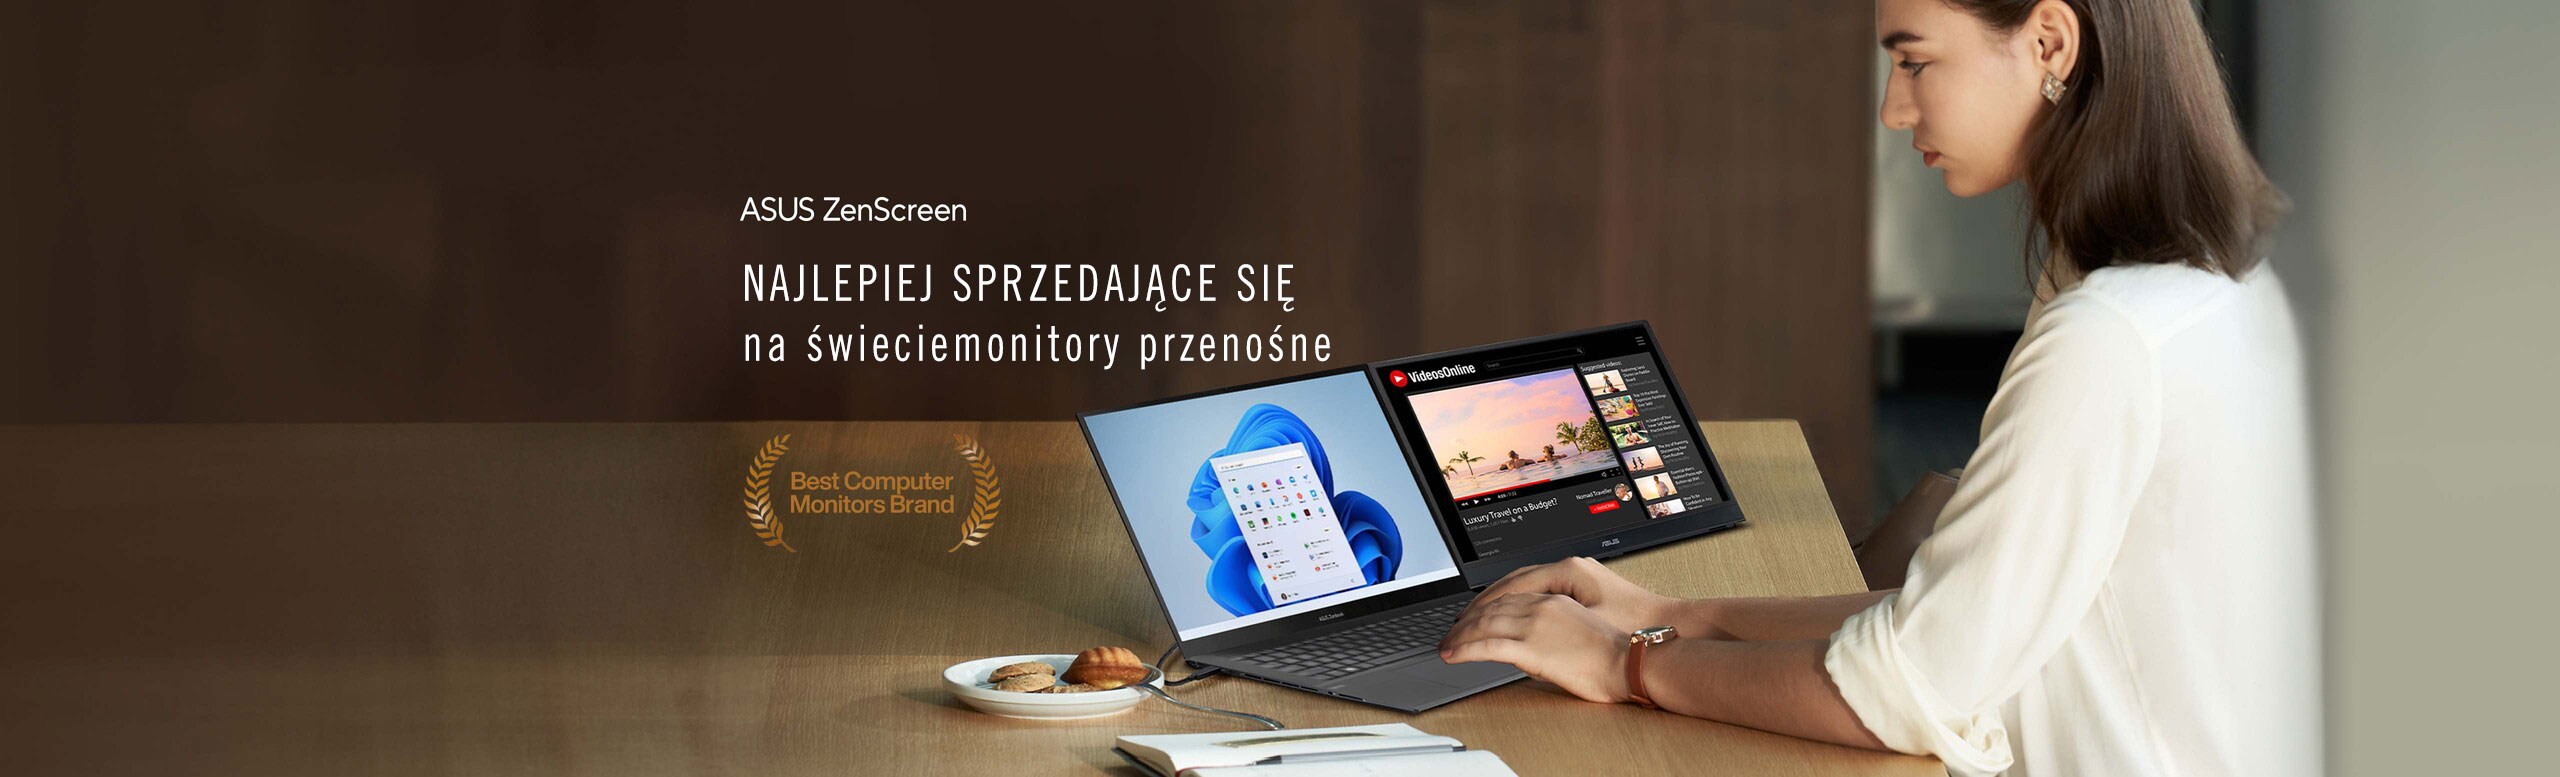 The world's best-selling travel monitor, the ASUS ZenScreen portable monitor is a slime & lightweight external monitor for productivity on the go.